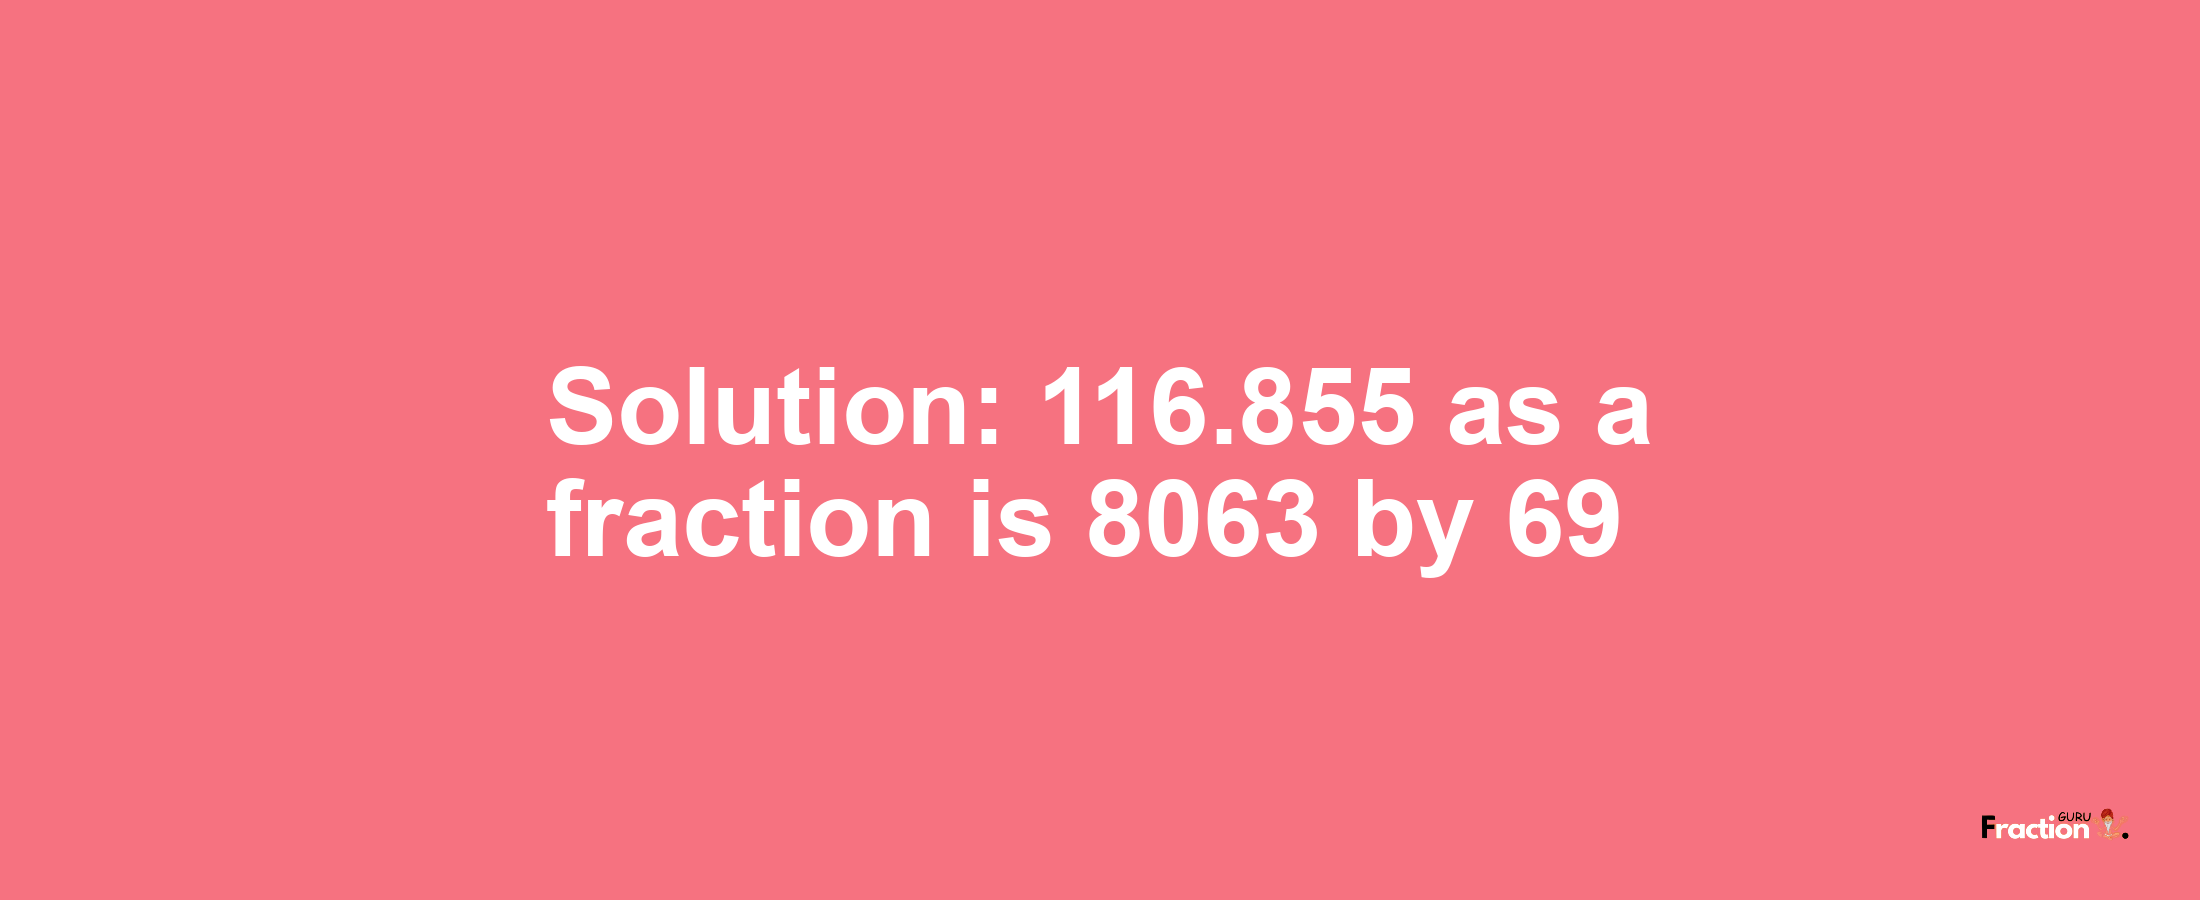 Solution:116.855 as a fraction is 8063/69